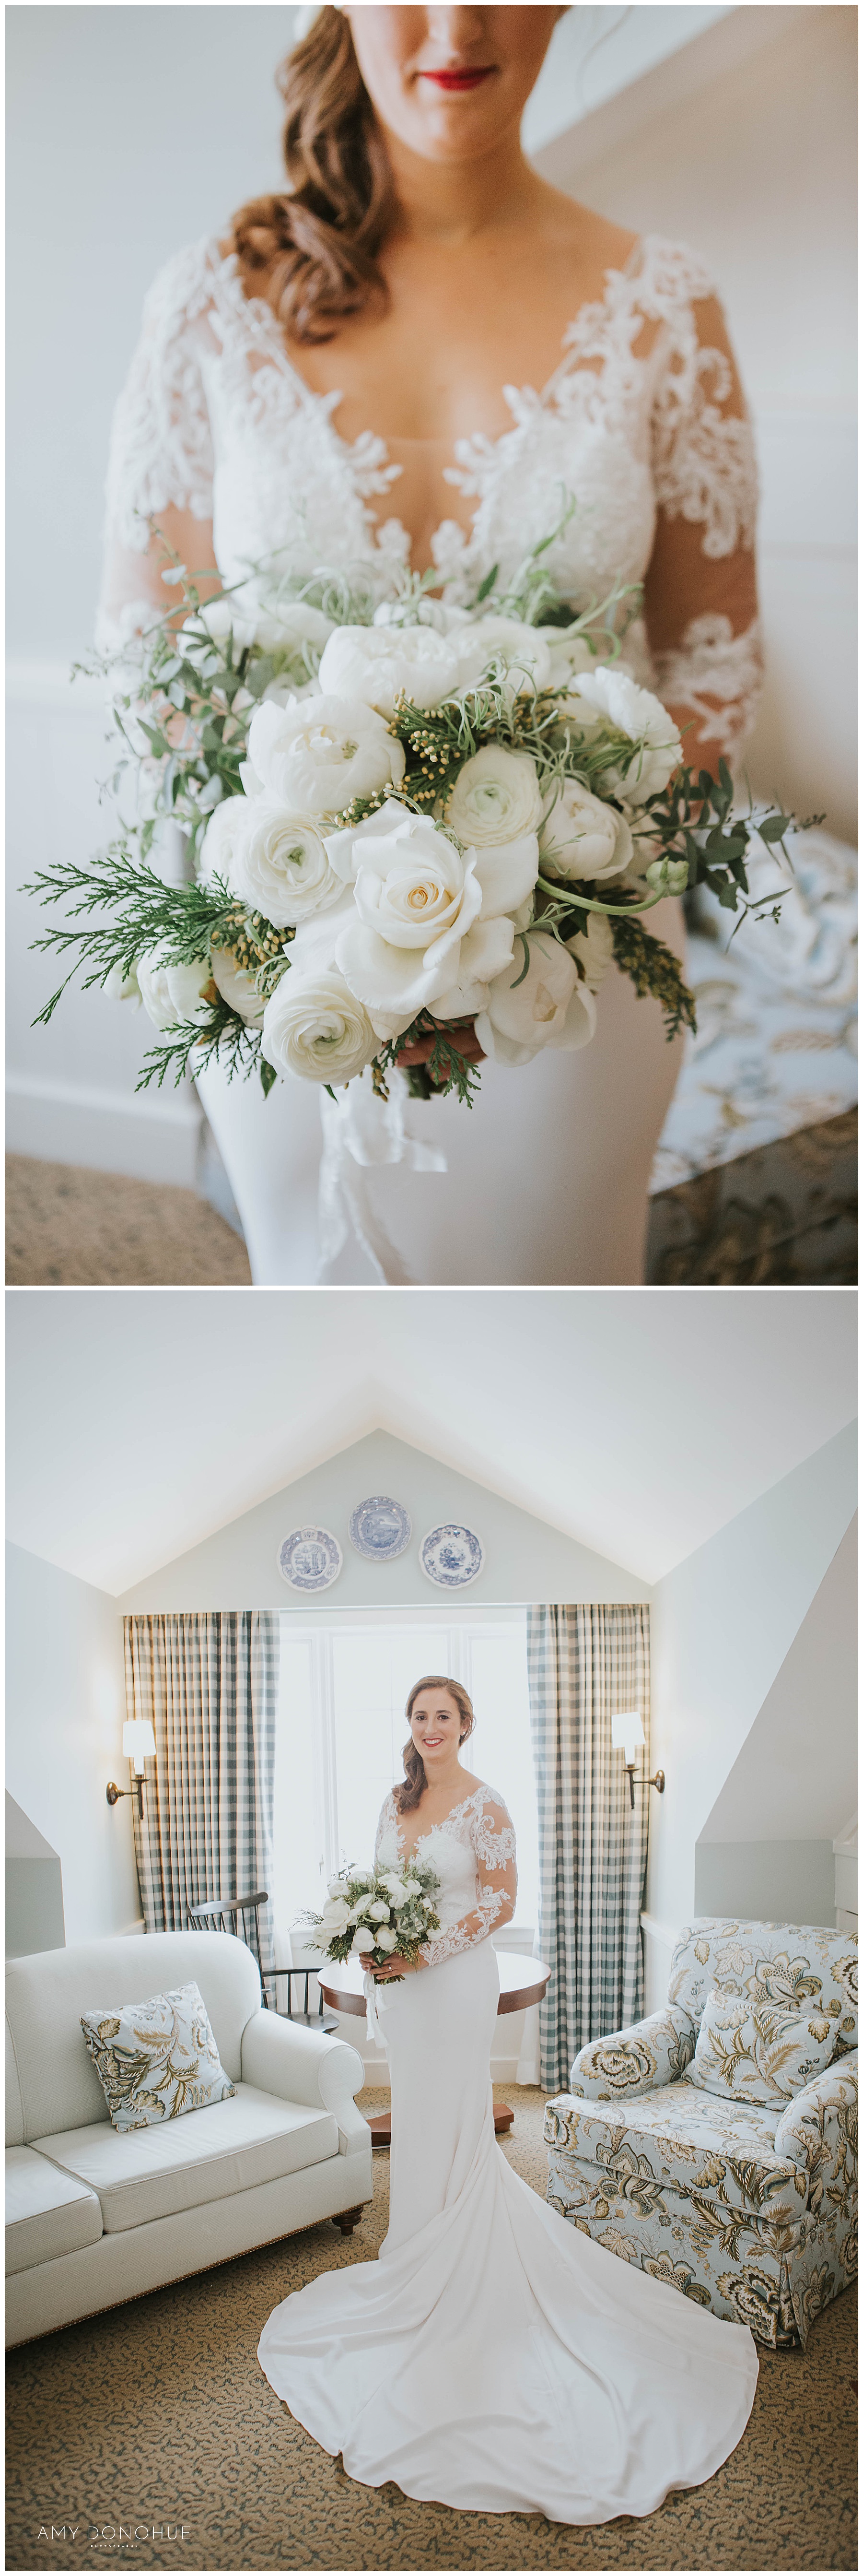 Floral Bouquet by Birds of a Flower and Getting into the Dress photos | Woodstock Inn & Resort | VT Wedding Photographer | © Amy Donohue Photography